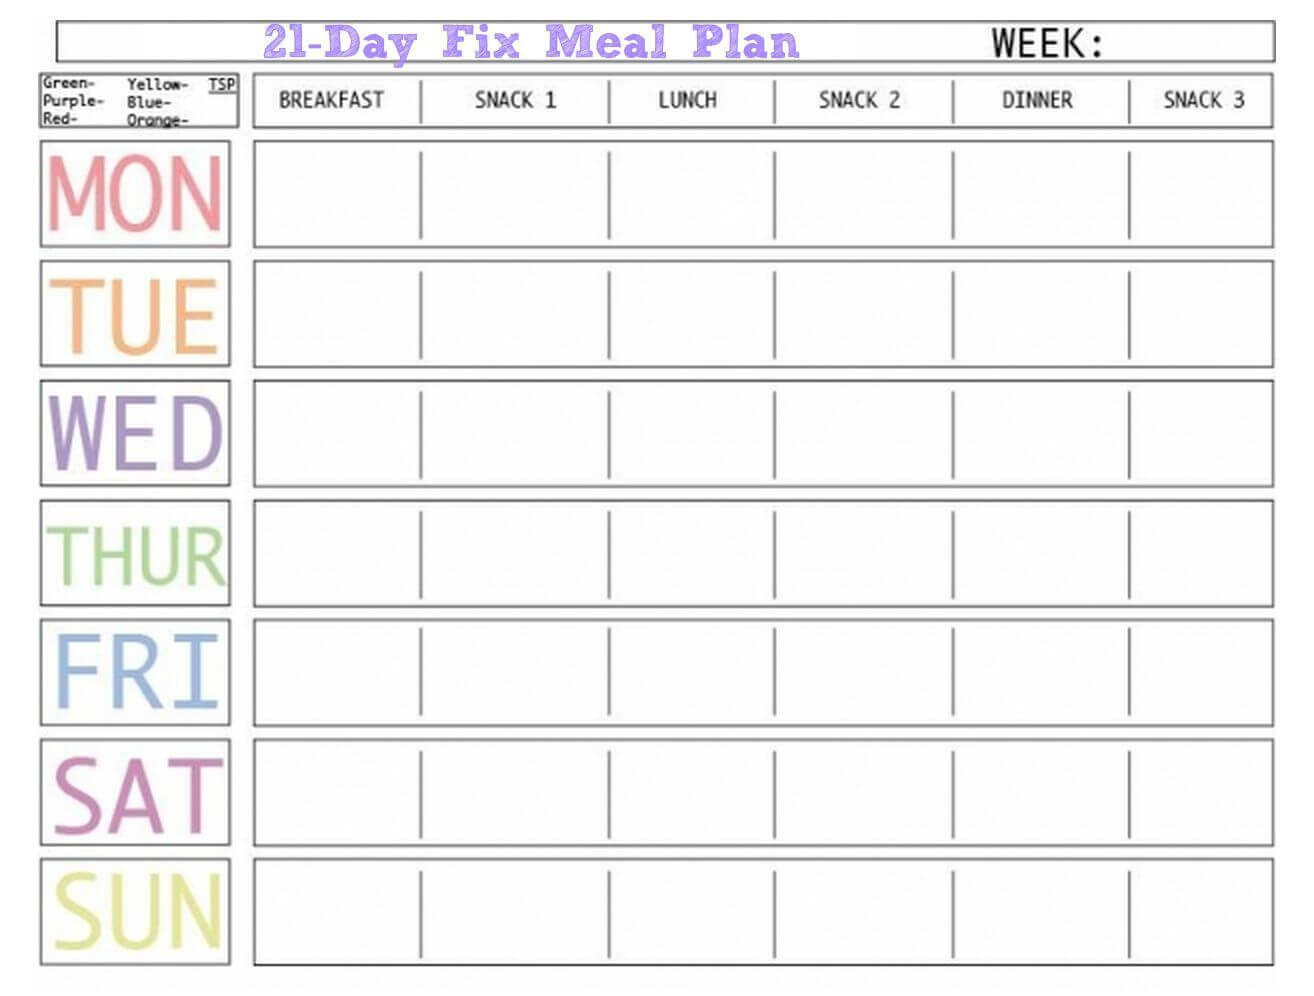 Here Is A Blank Meal Plan Template You Can Use. | Meal With Blank Meal Plan Template